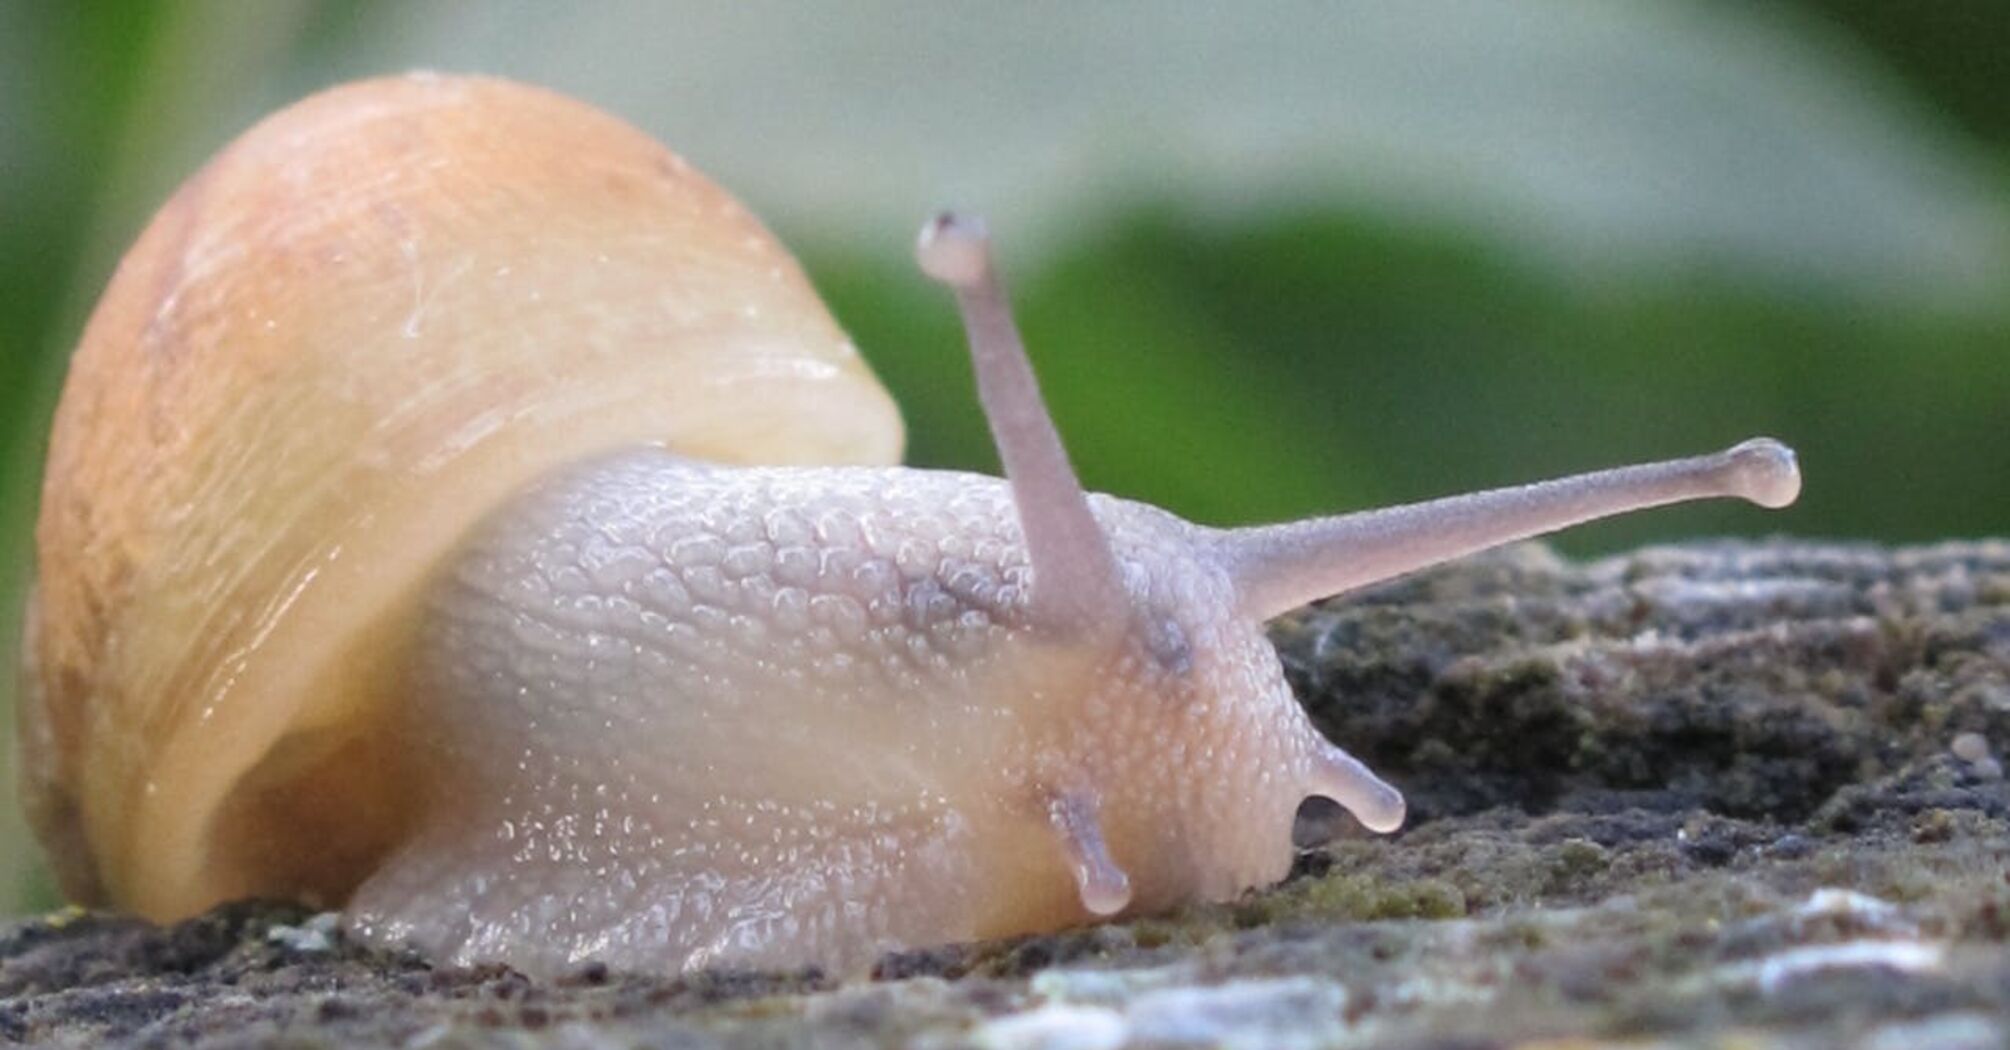 Experts named eight humane ways to get rid of slugs and snails in the garden in spring